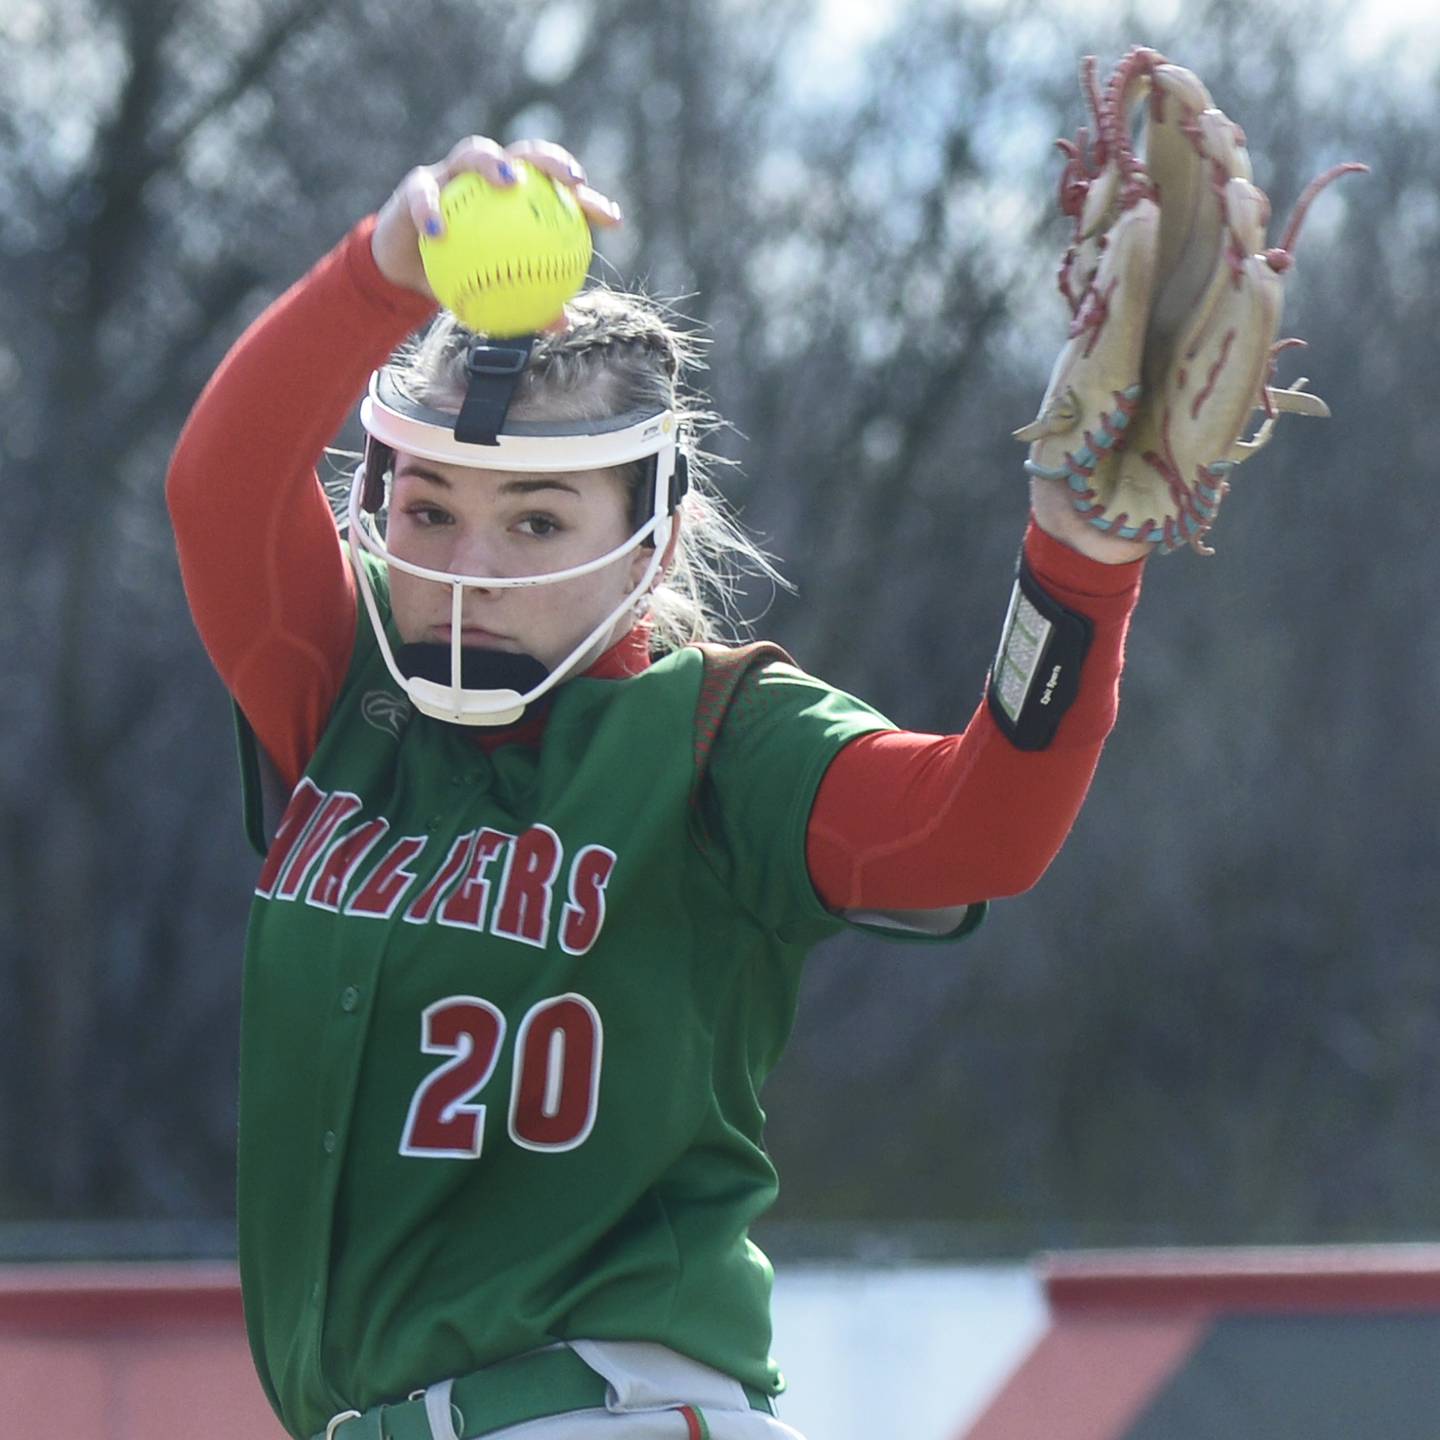 La Salle Peru’s starting pitcher Taylor Vescogni lets go with a pitch against Streator Wednesday at Streator.